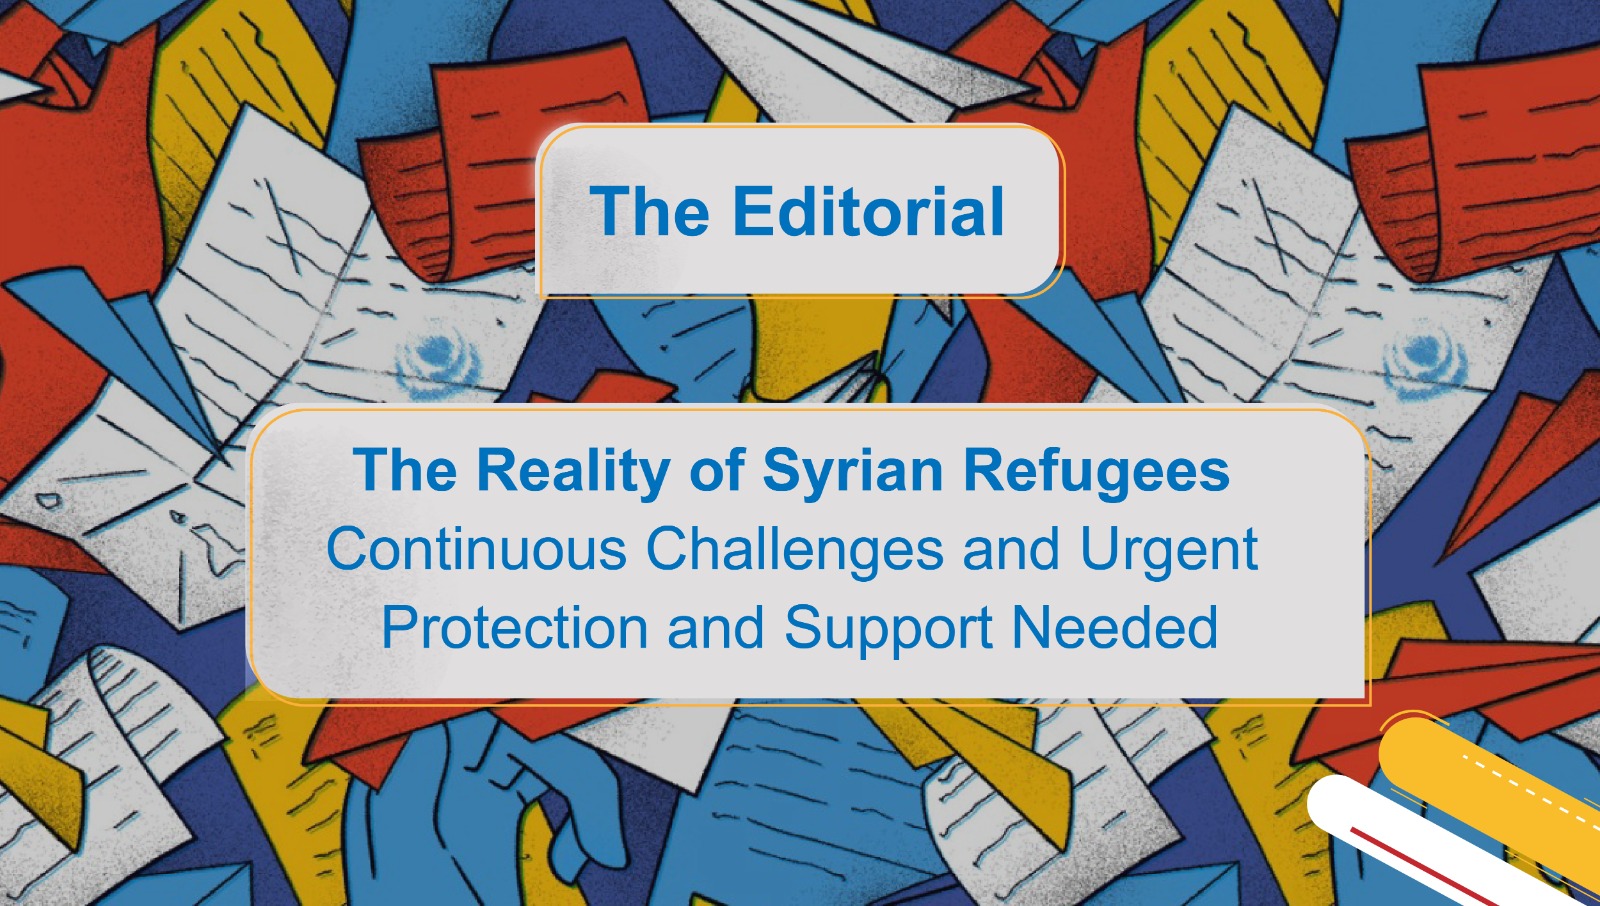 The Reality of Syrian Refugees: Continuous Challenges and Urgent Protection and Support Needed